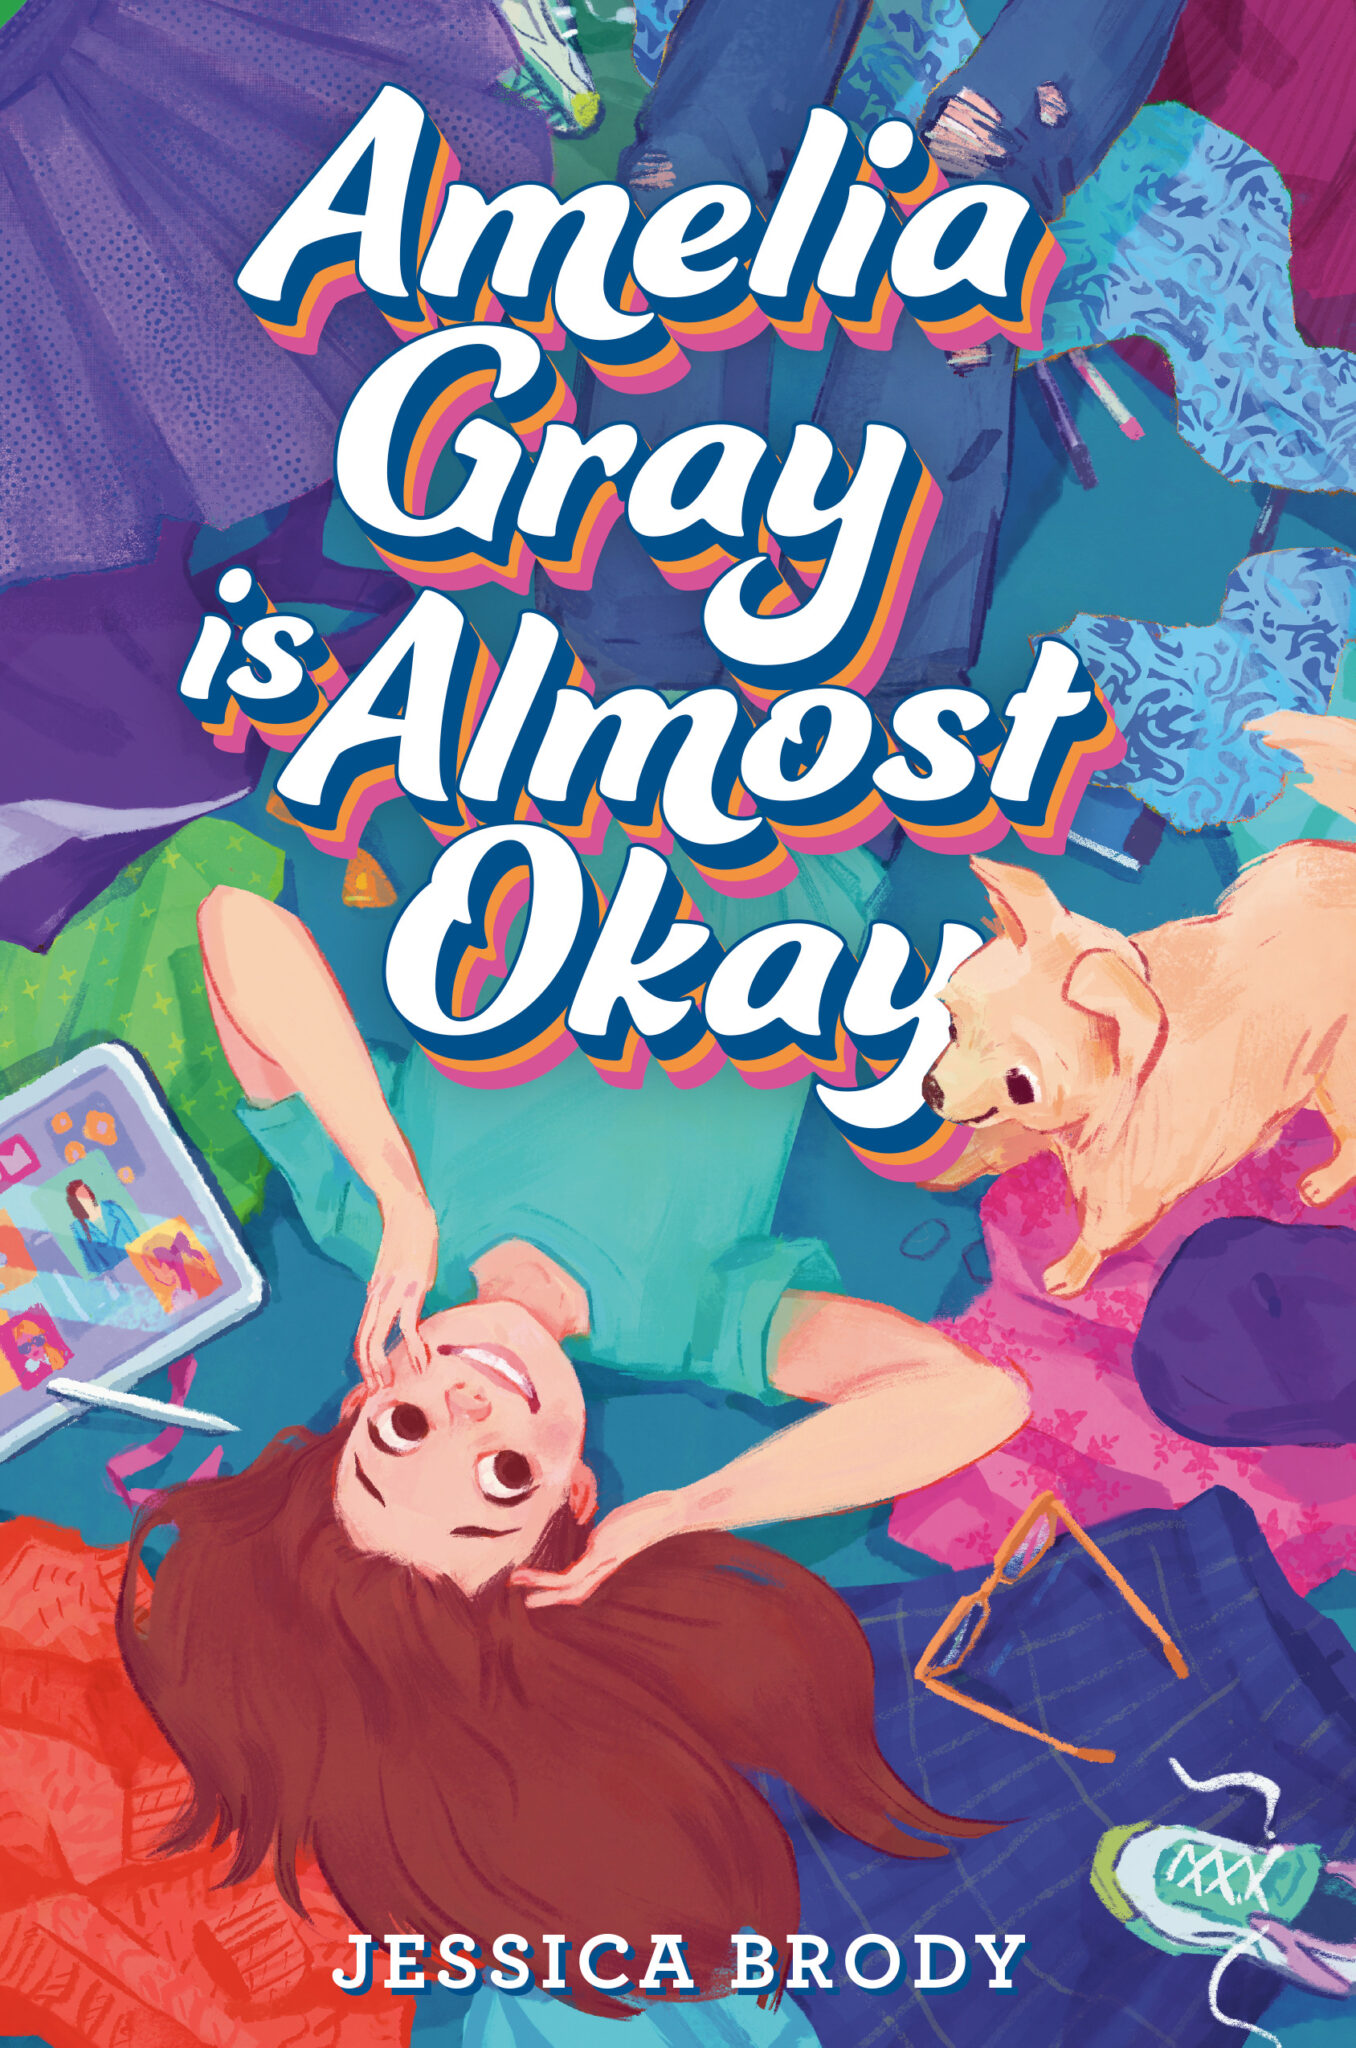 front cover of the book Amelia Gray is Almost Okay by Jessica Brody